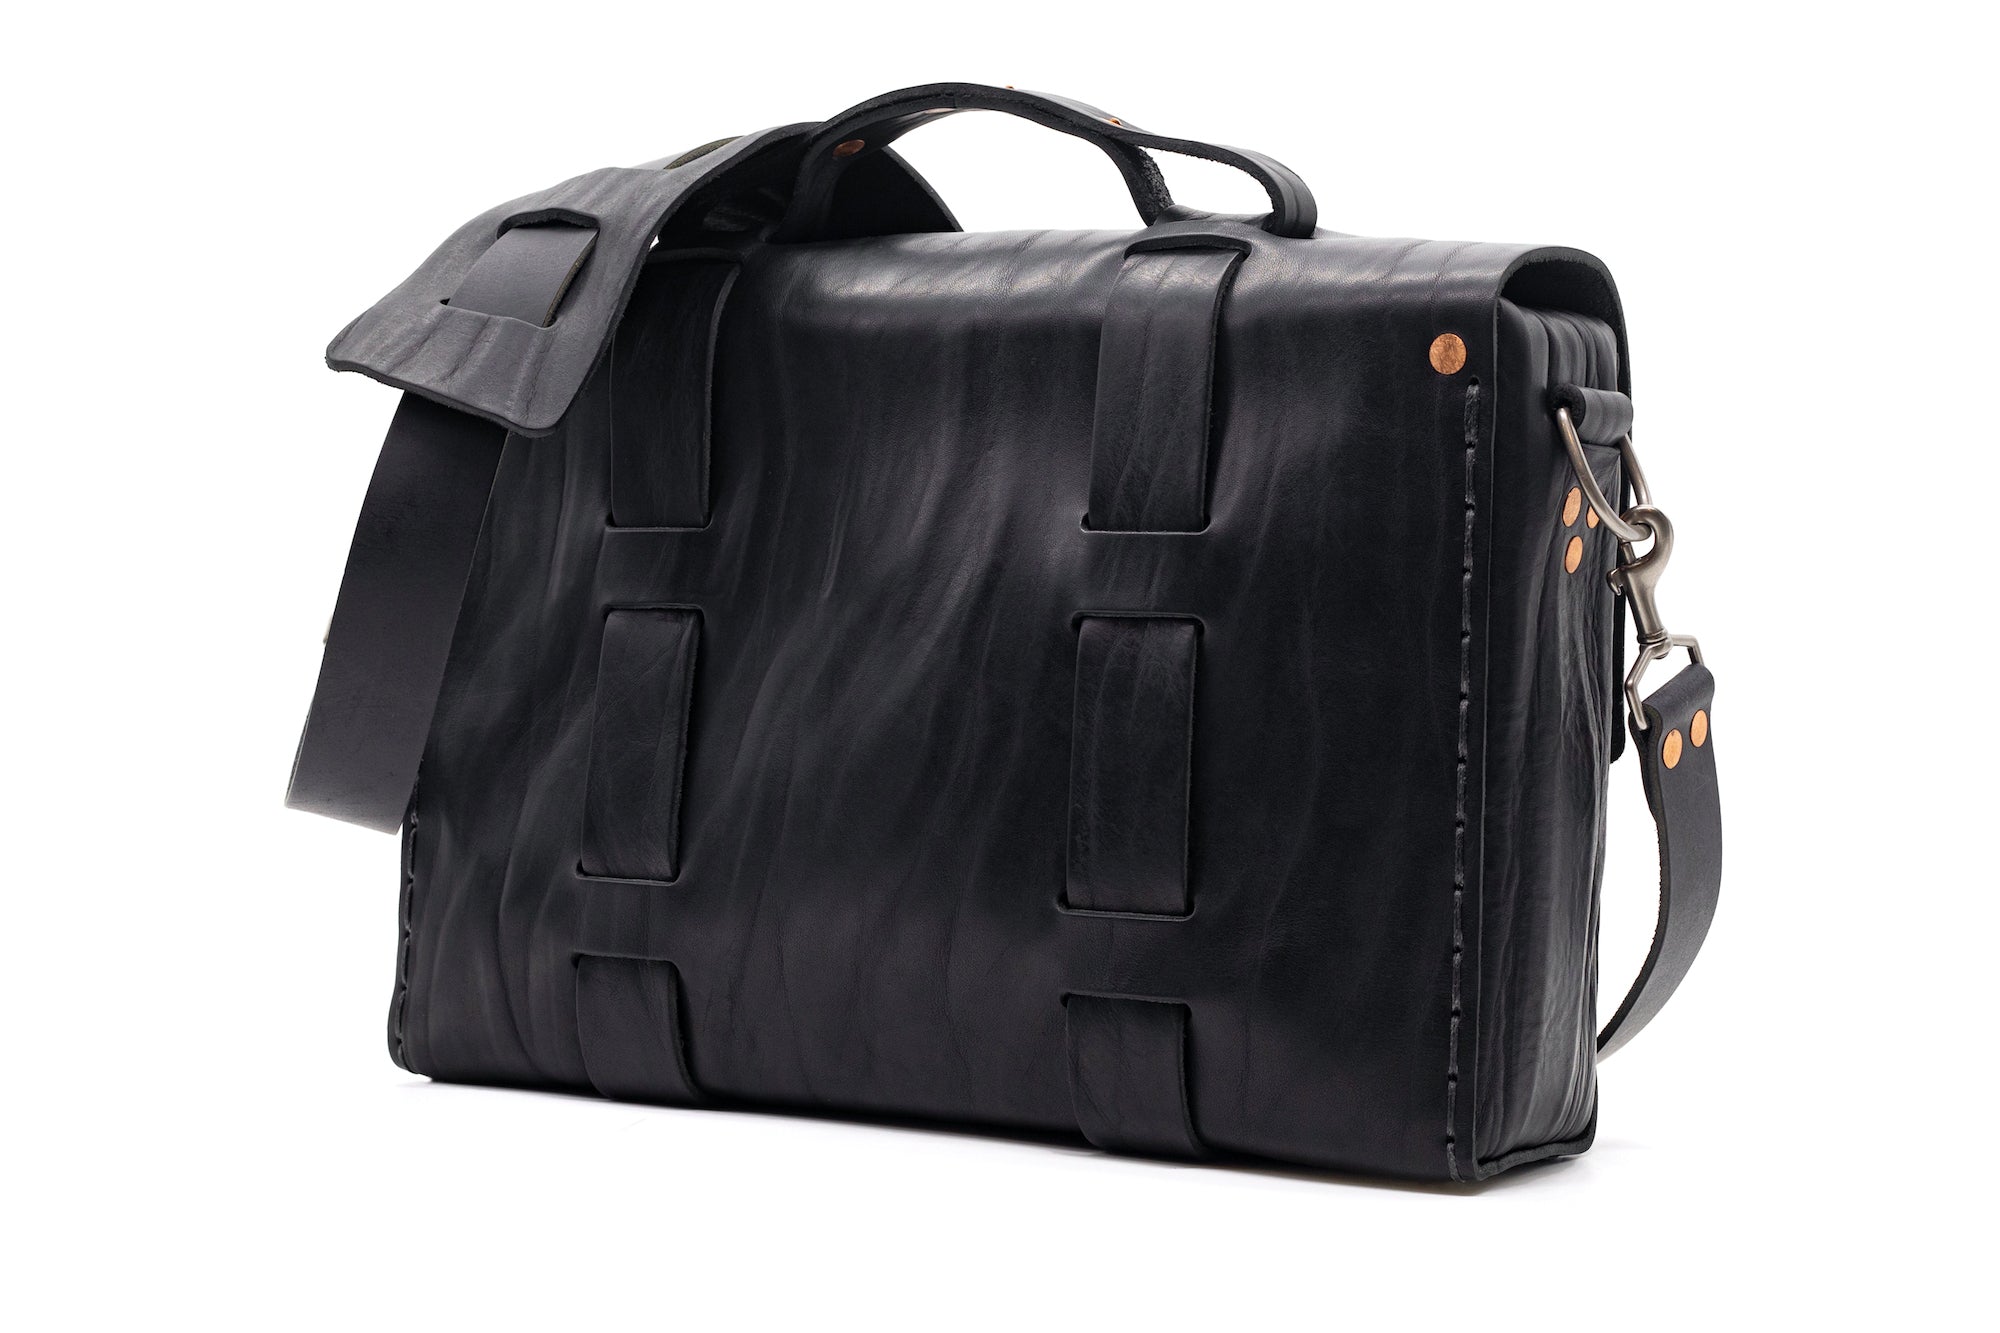 Limited Edition No. 4313 - Minimalist Standard Leather Satchel in Commonwealth Black - 5 MADE, ONLY 4 LEFT